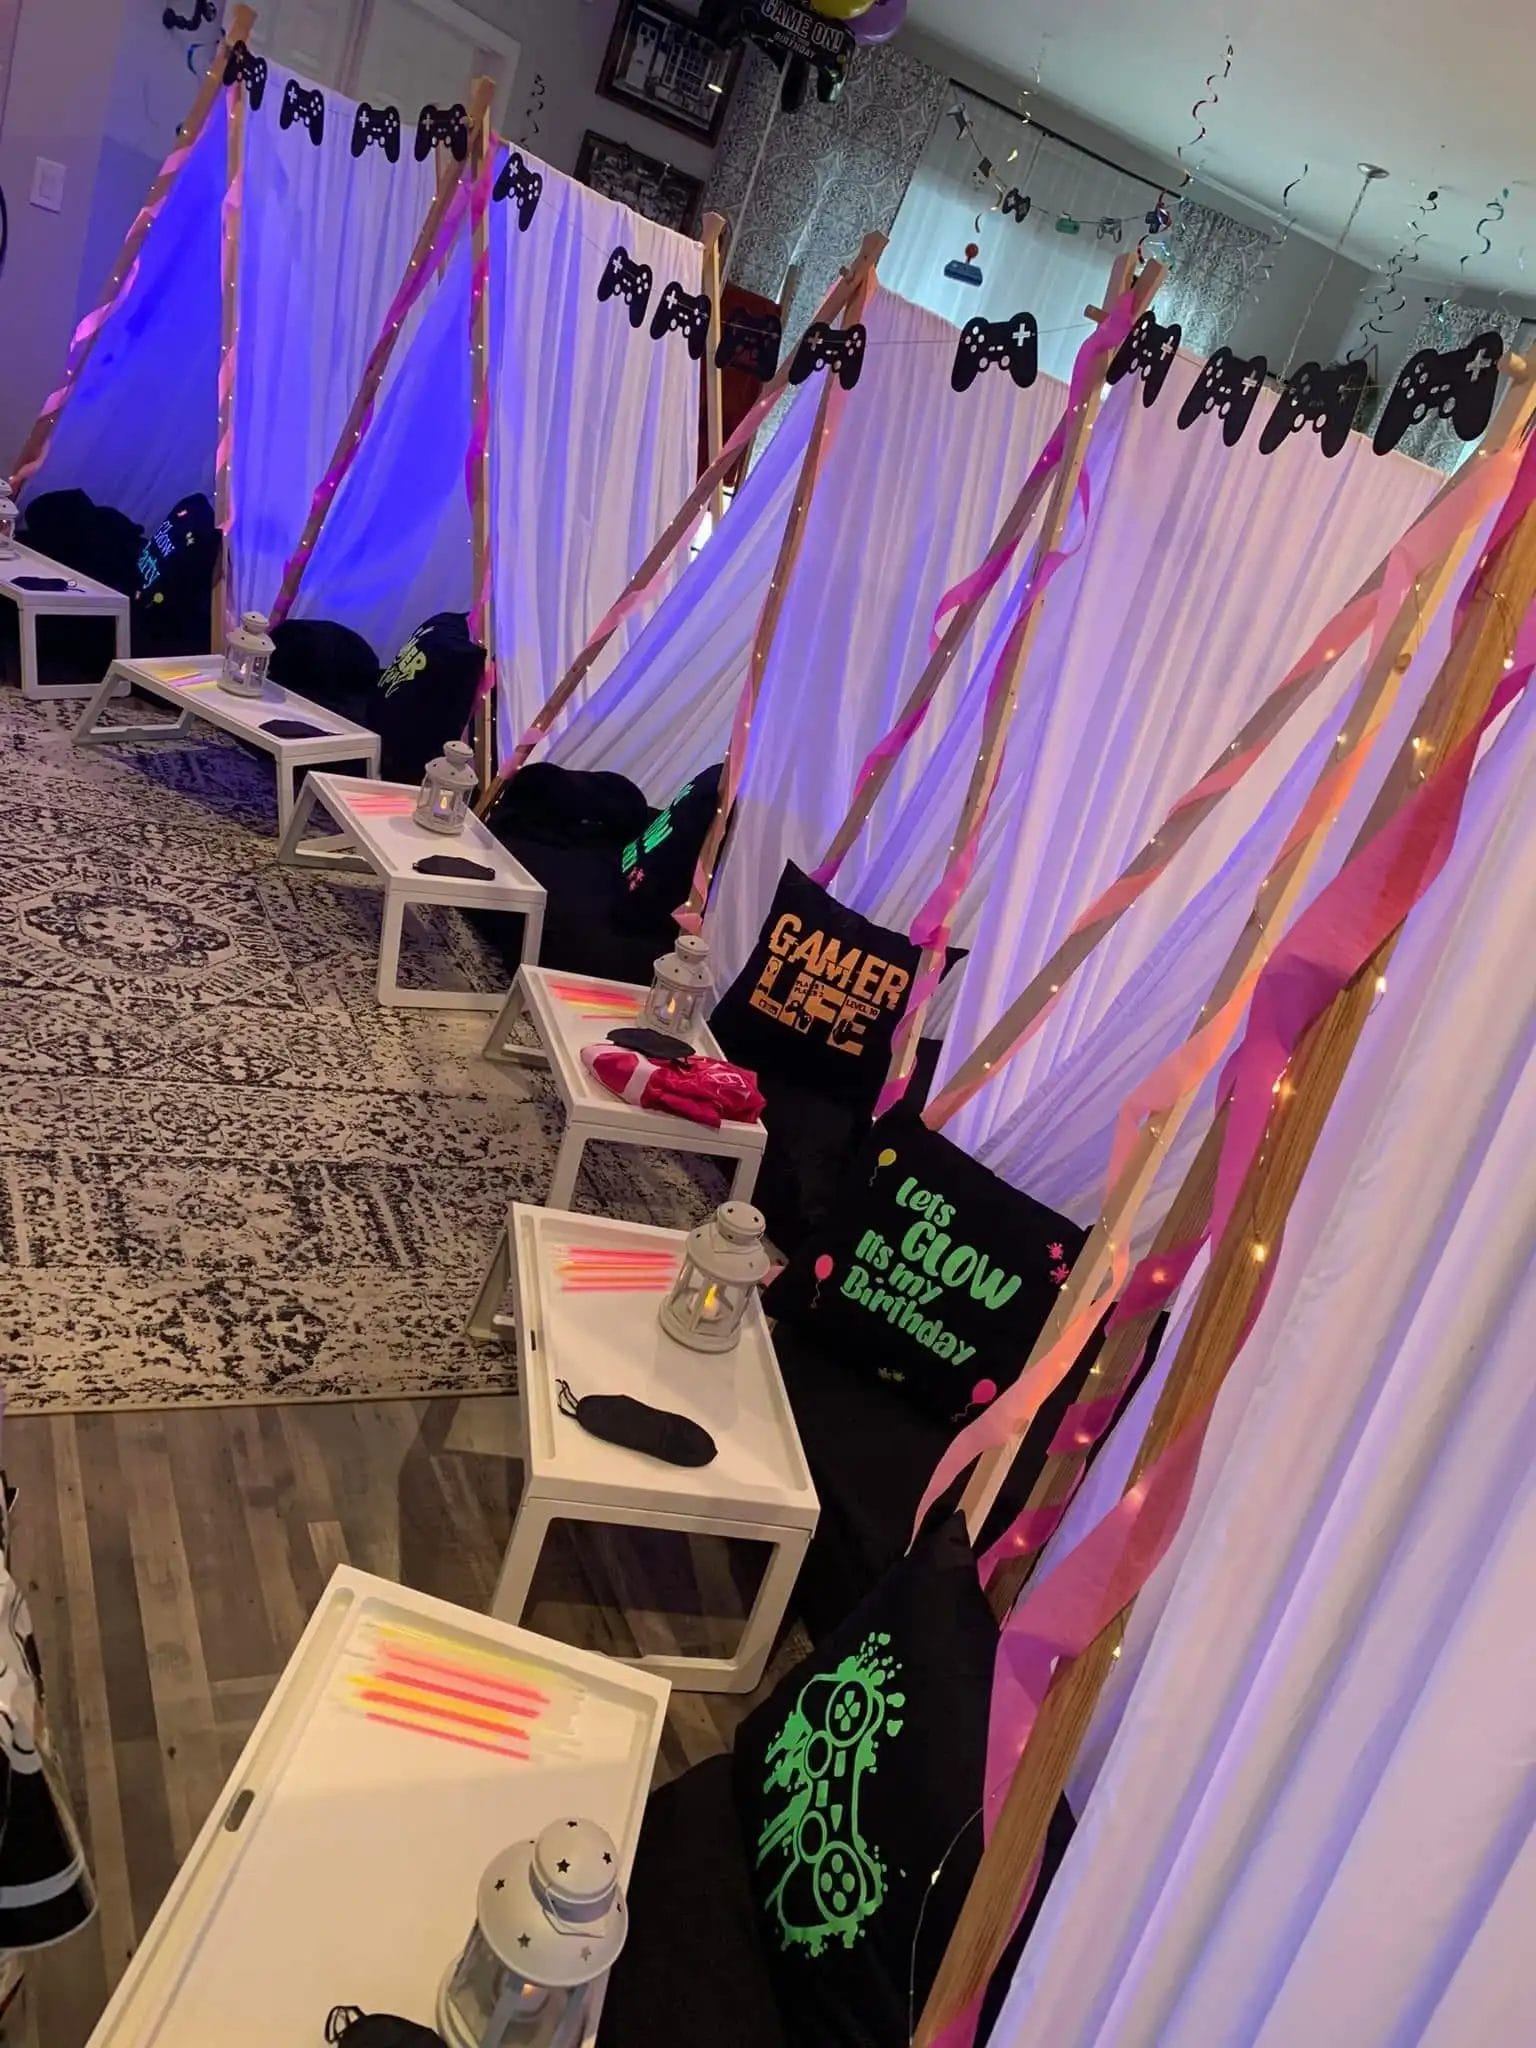 A gaming party setup in Central Florida with rows of draped consoles and colorful decorations, featuring glow-in-the-dark and gaming-themed elements.